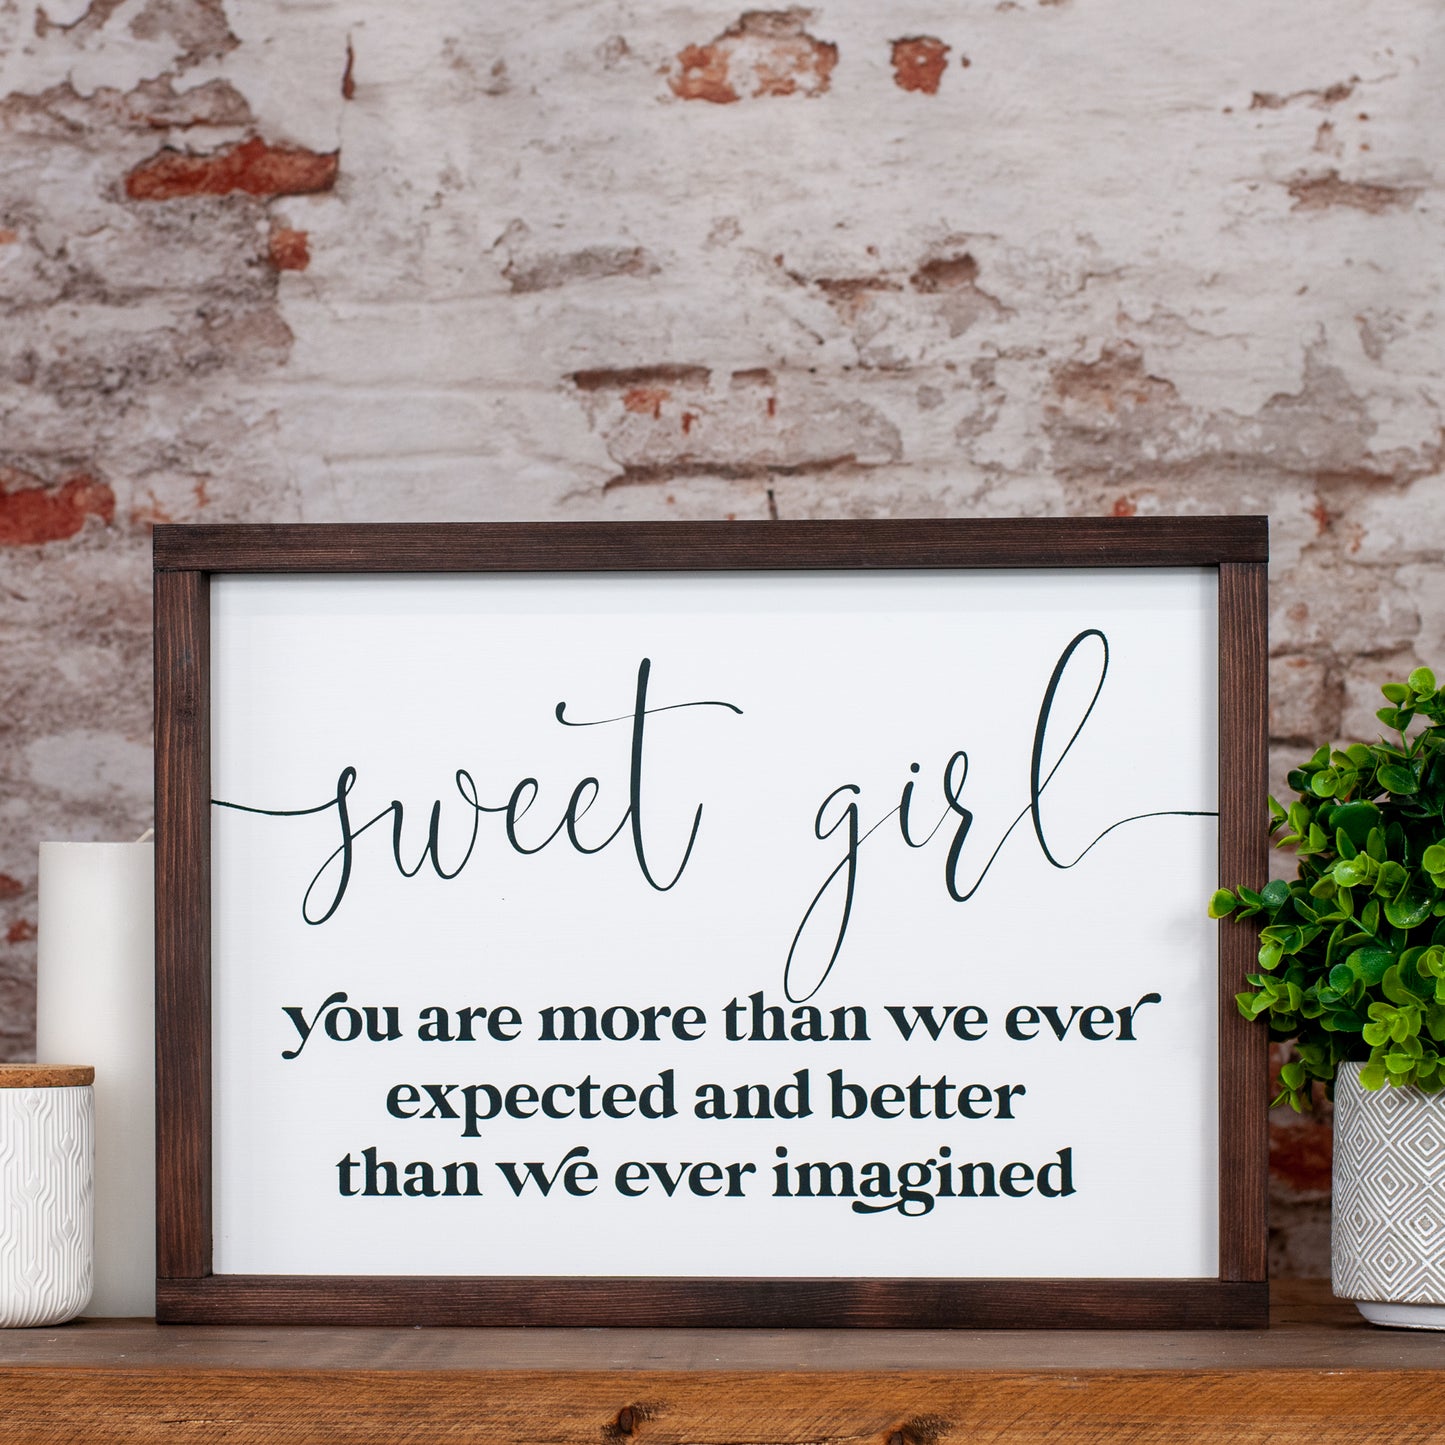 sweet girl, you are more than we ever expected and better than we ever imagined  ~ wood sign